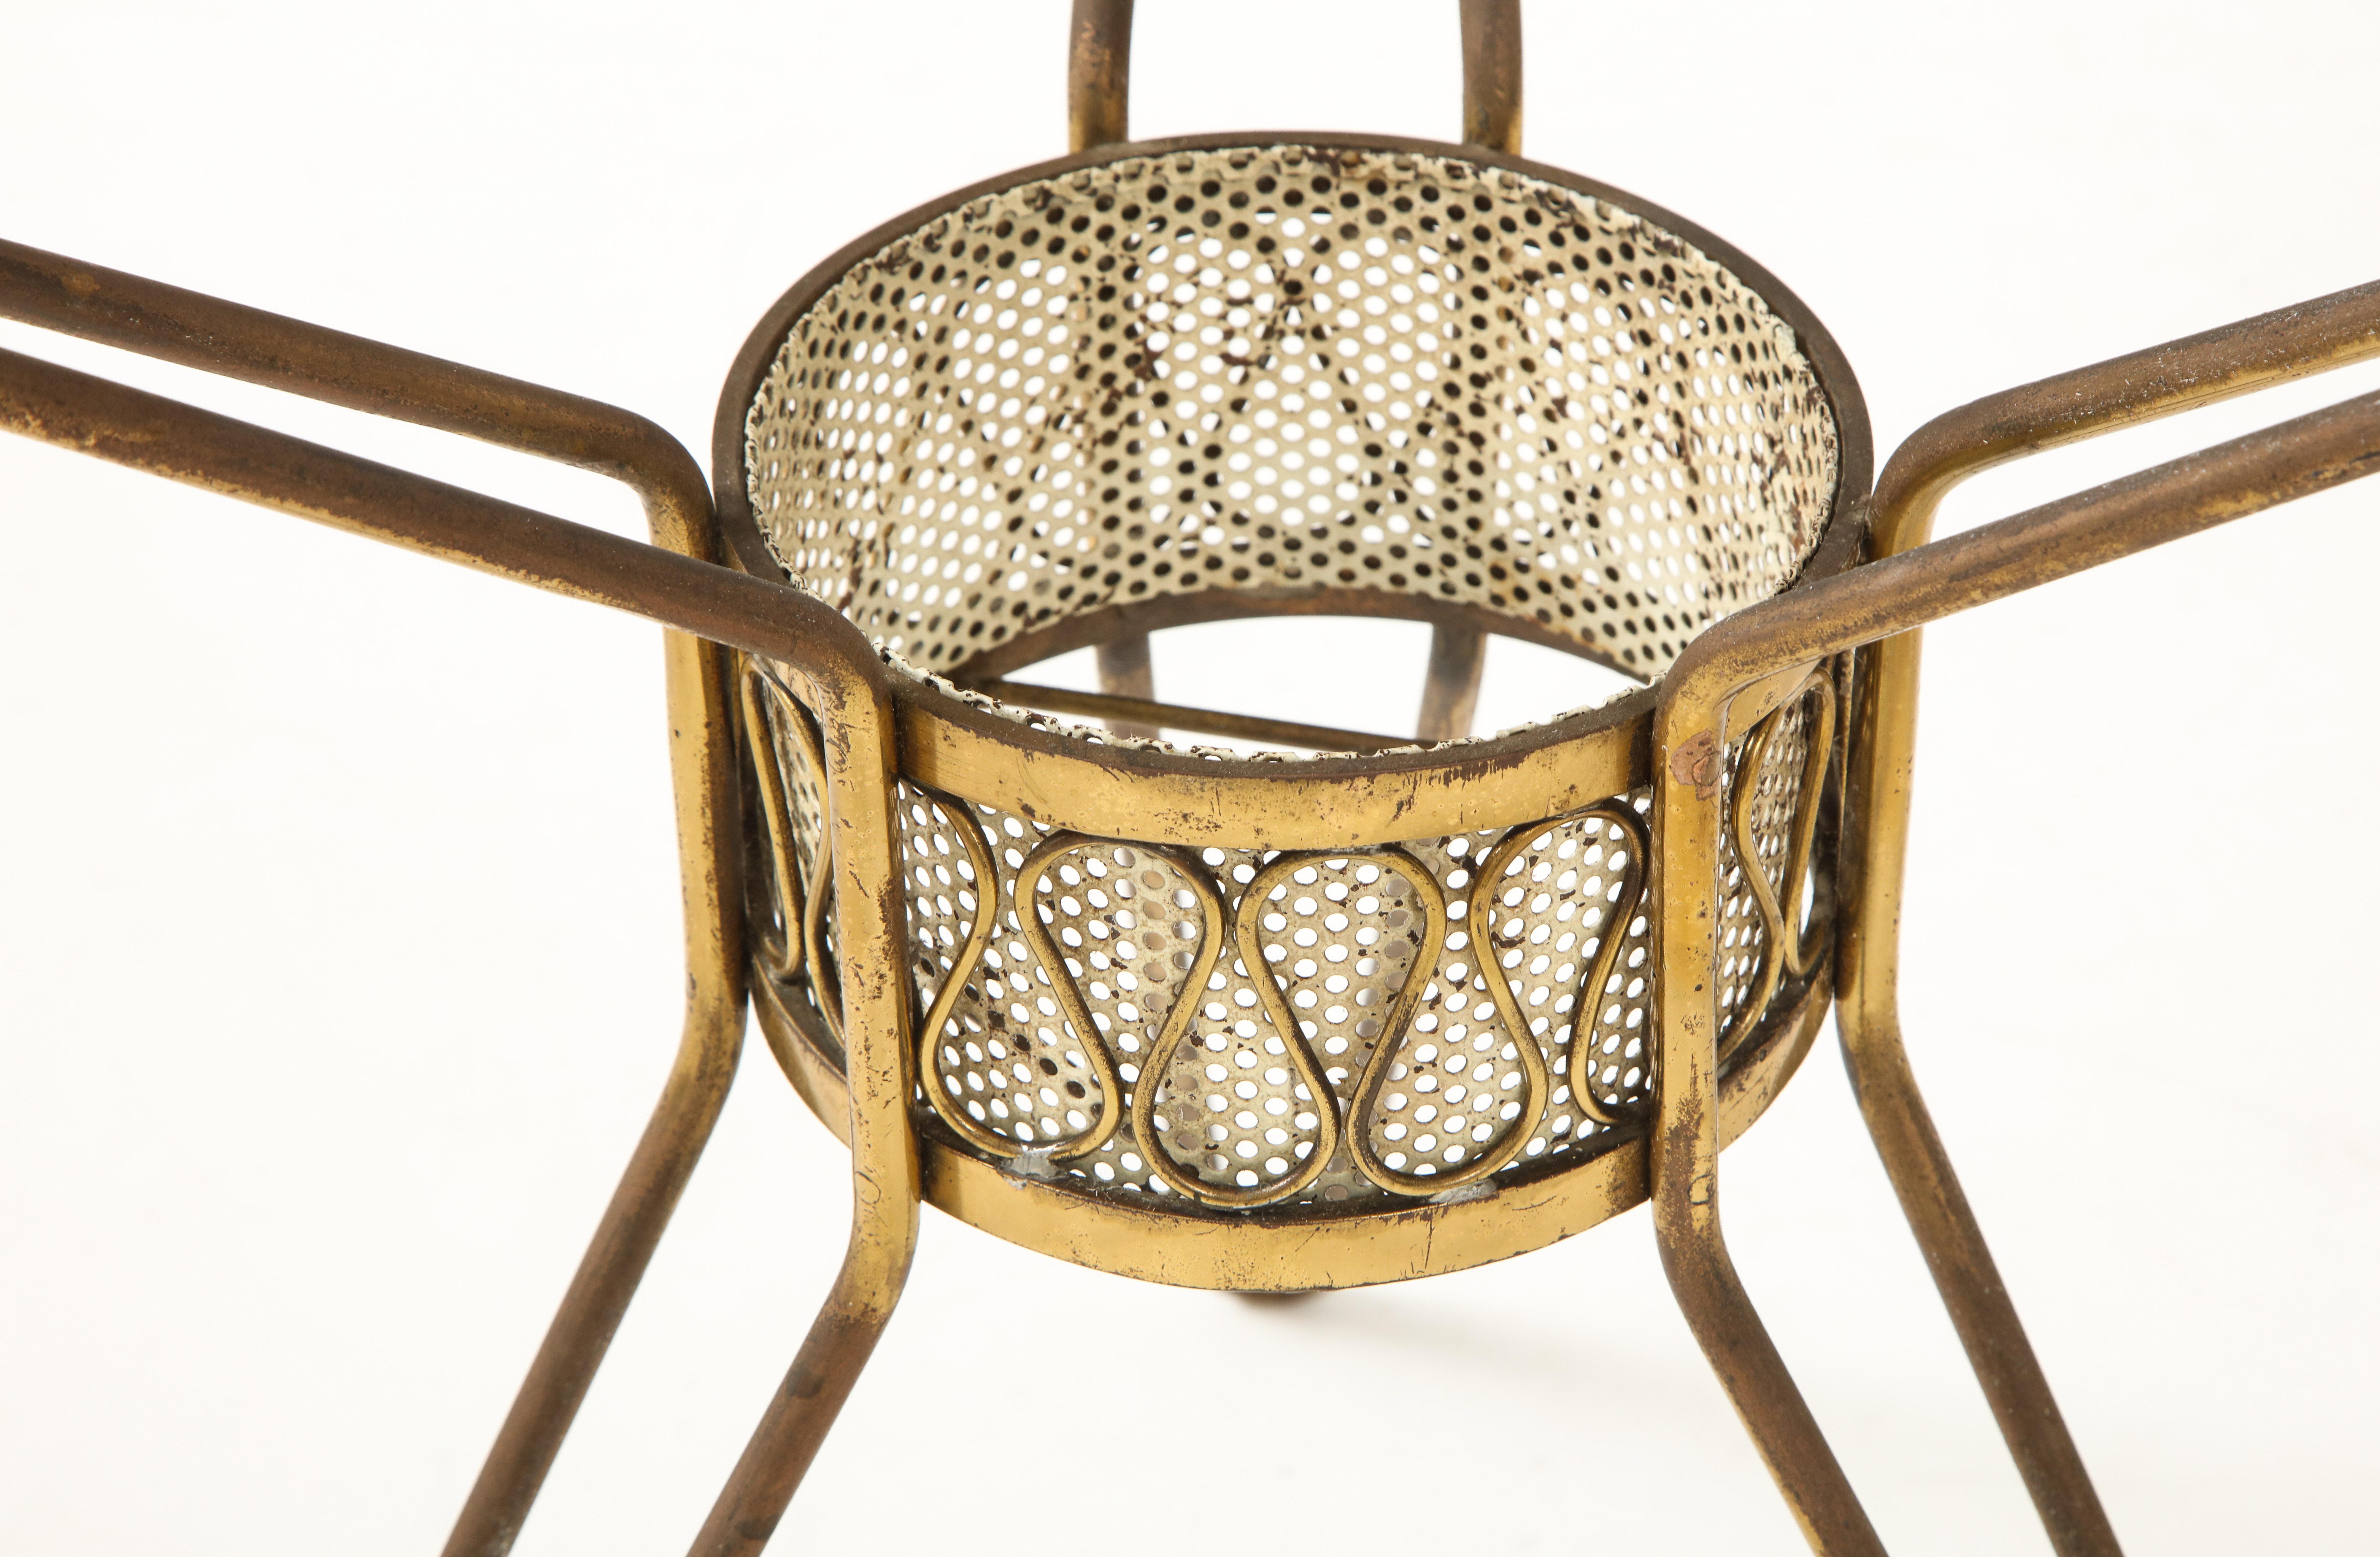 Brass Gio Ponti Style Occasional Tripod Table, of the Period, Italy, circa 1950s